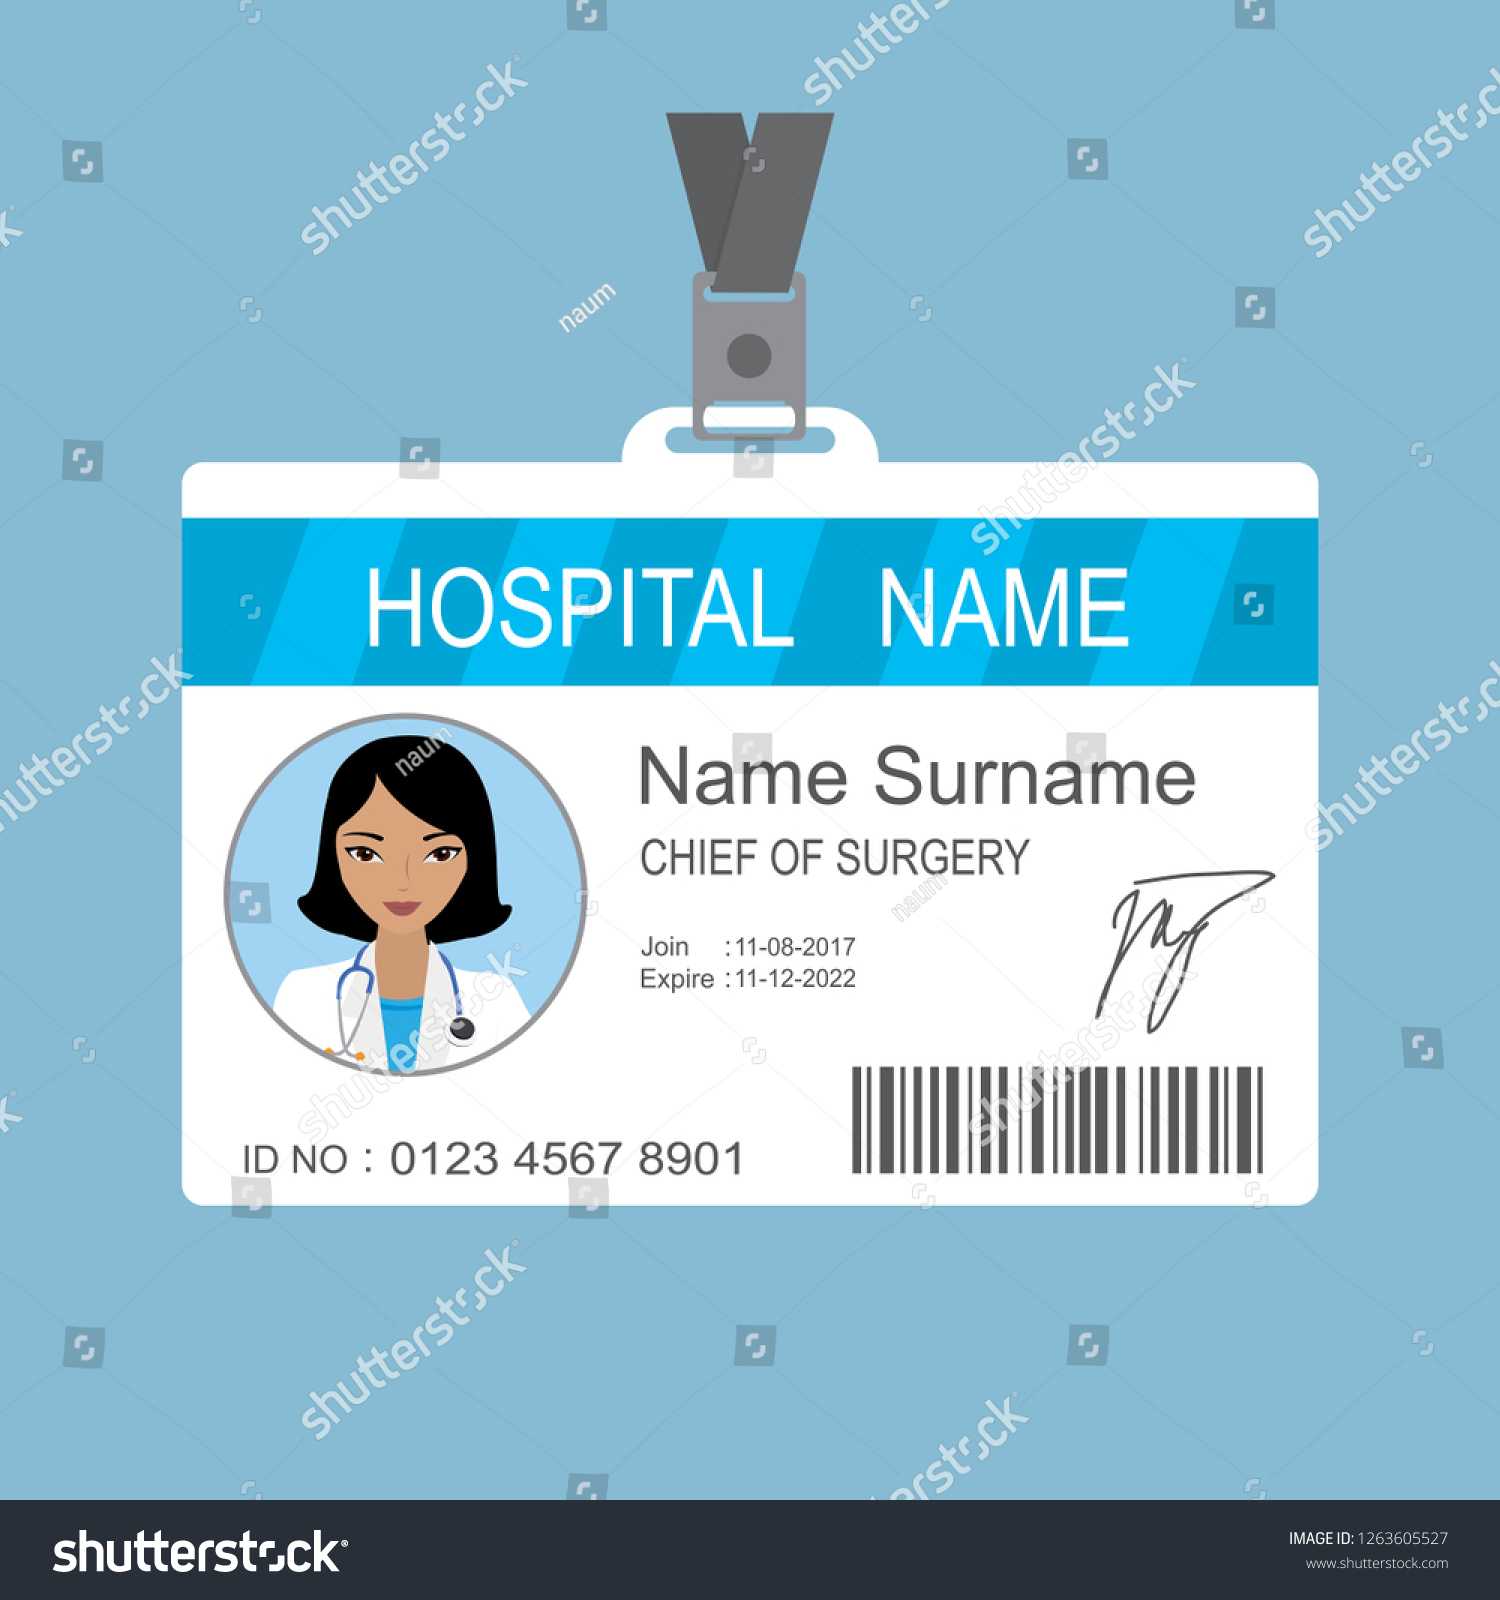 Female Asian Doctor Id Card Templatemedical Stock Vector Throughout Hospital Id Card Template